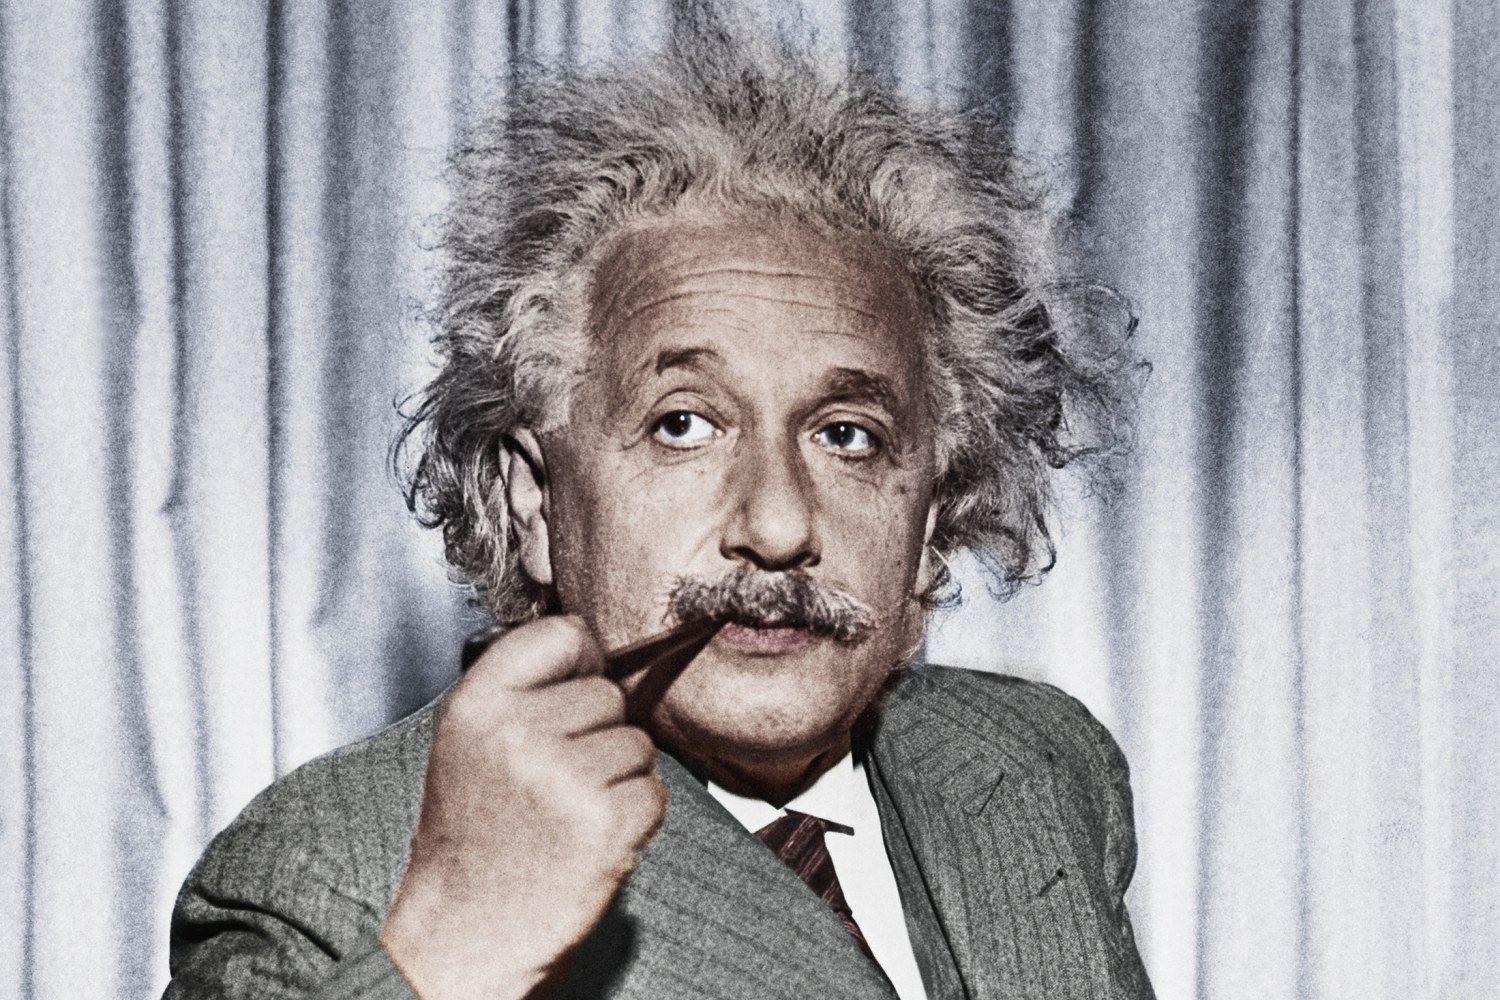 Ten smartest people with the Highest IQ scores recorded